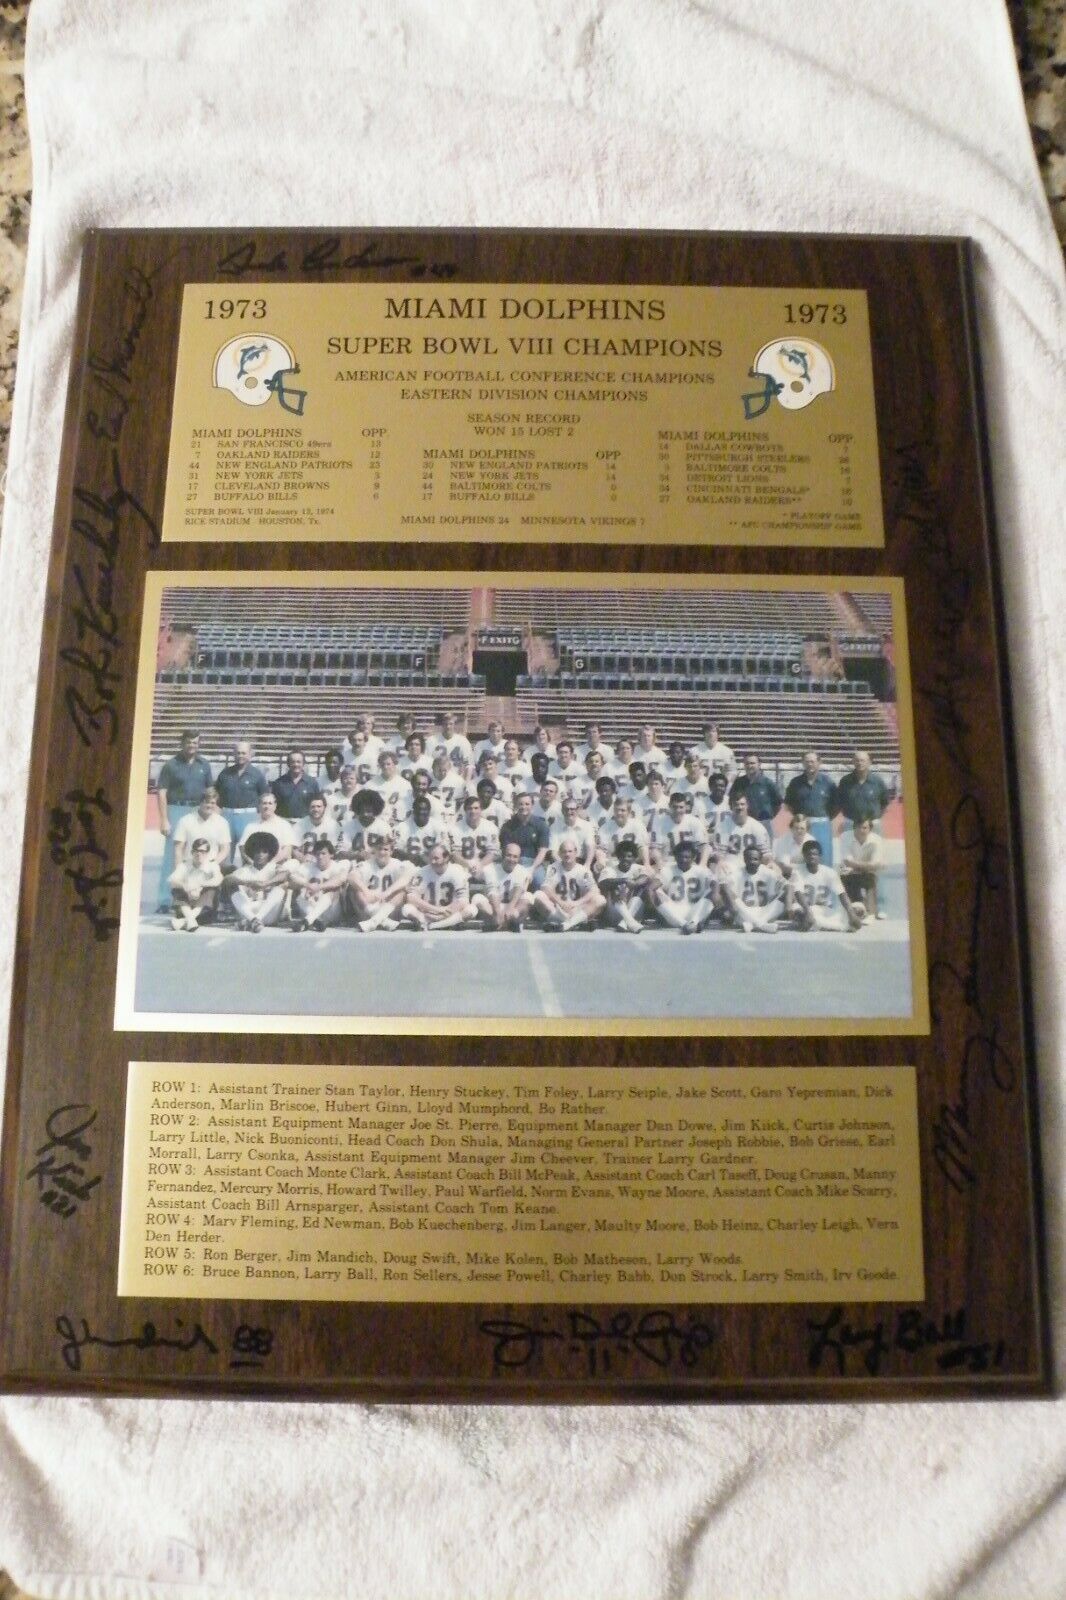 Miami Dolphins 1973 73 Signed Wall Plaque 10 Signatures Mandich kuechenberg